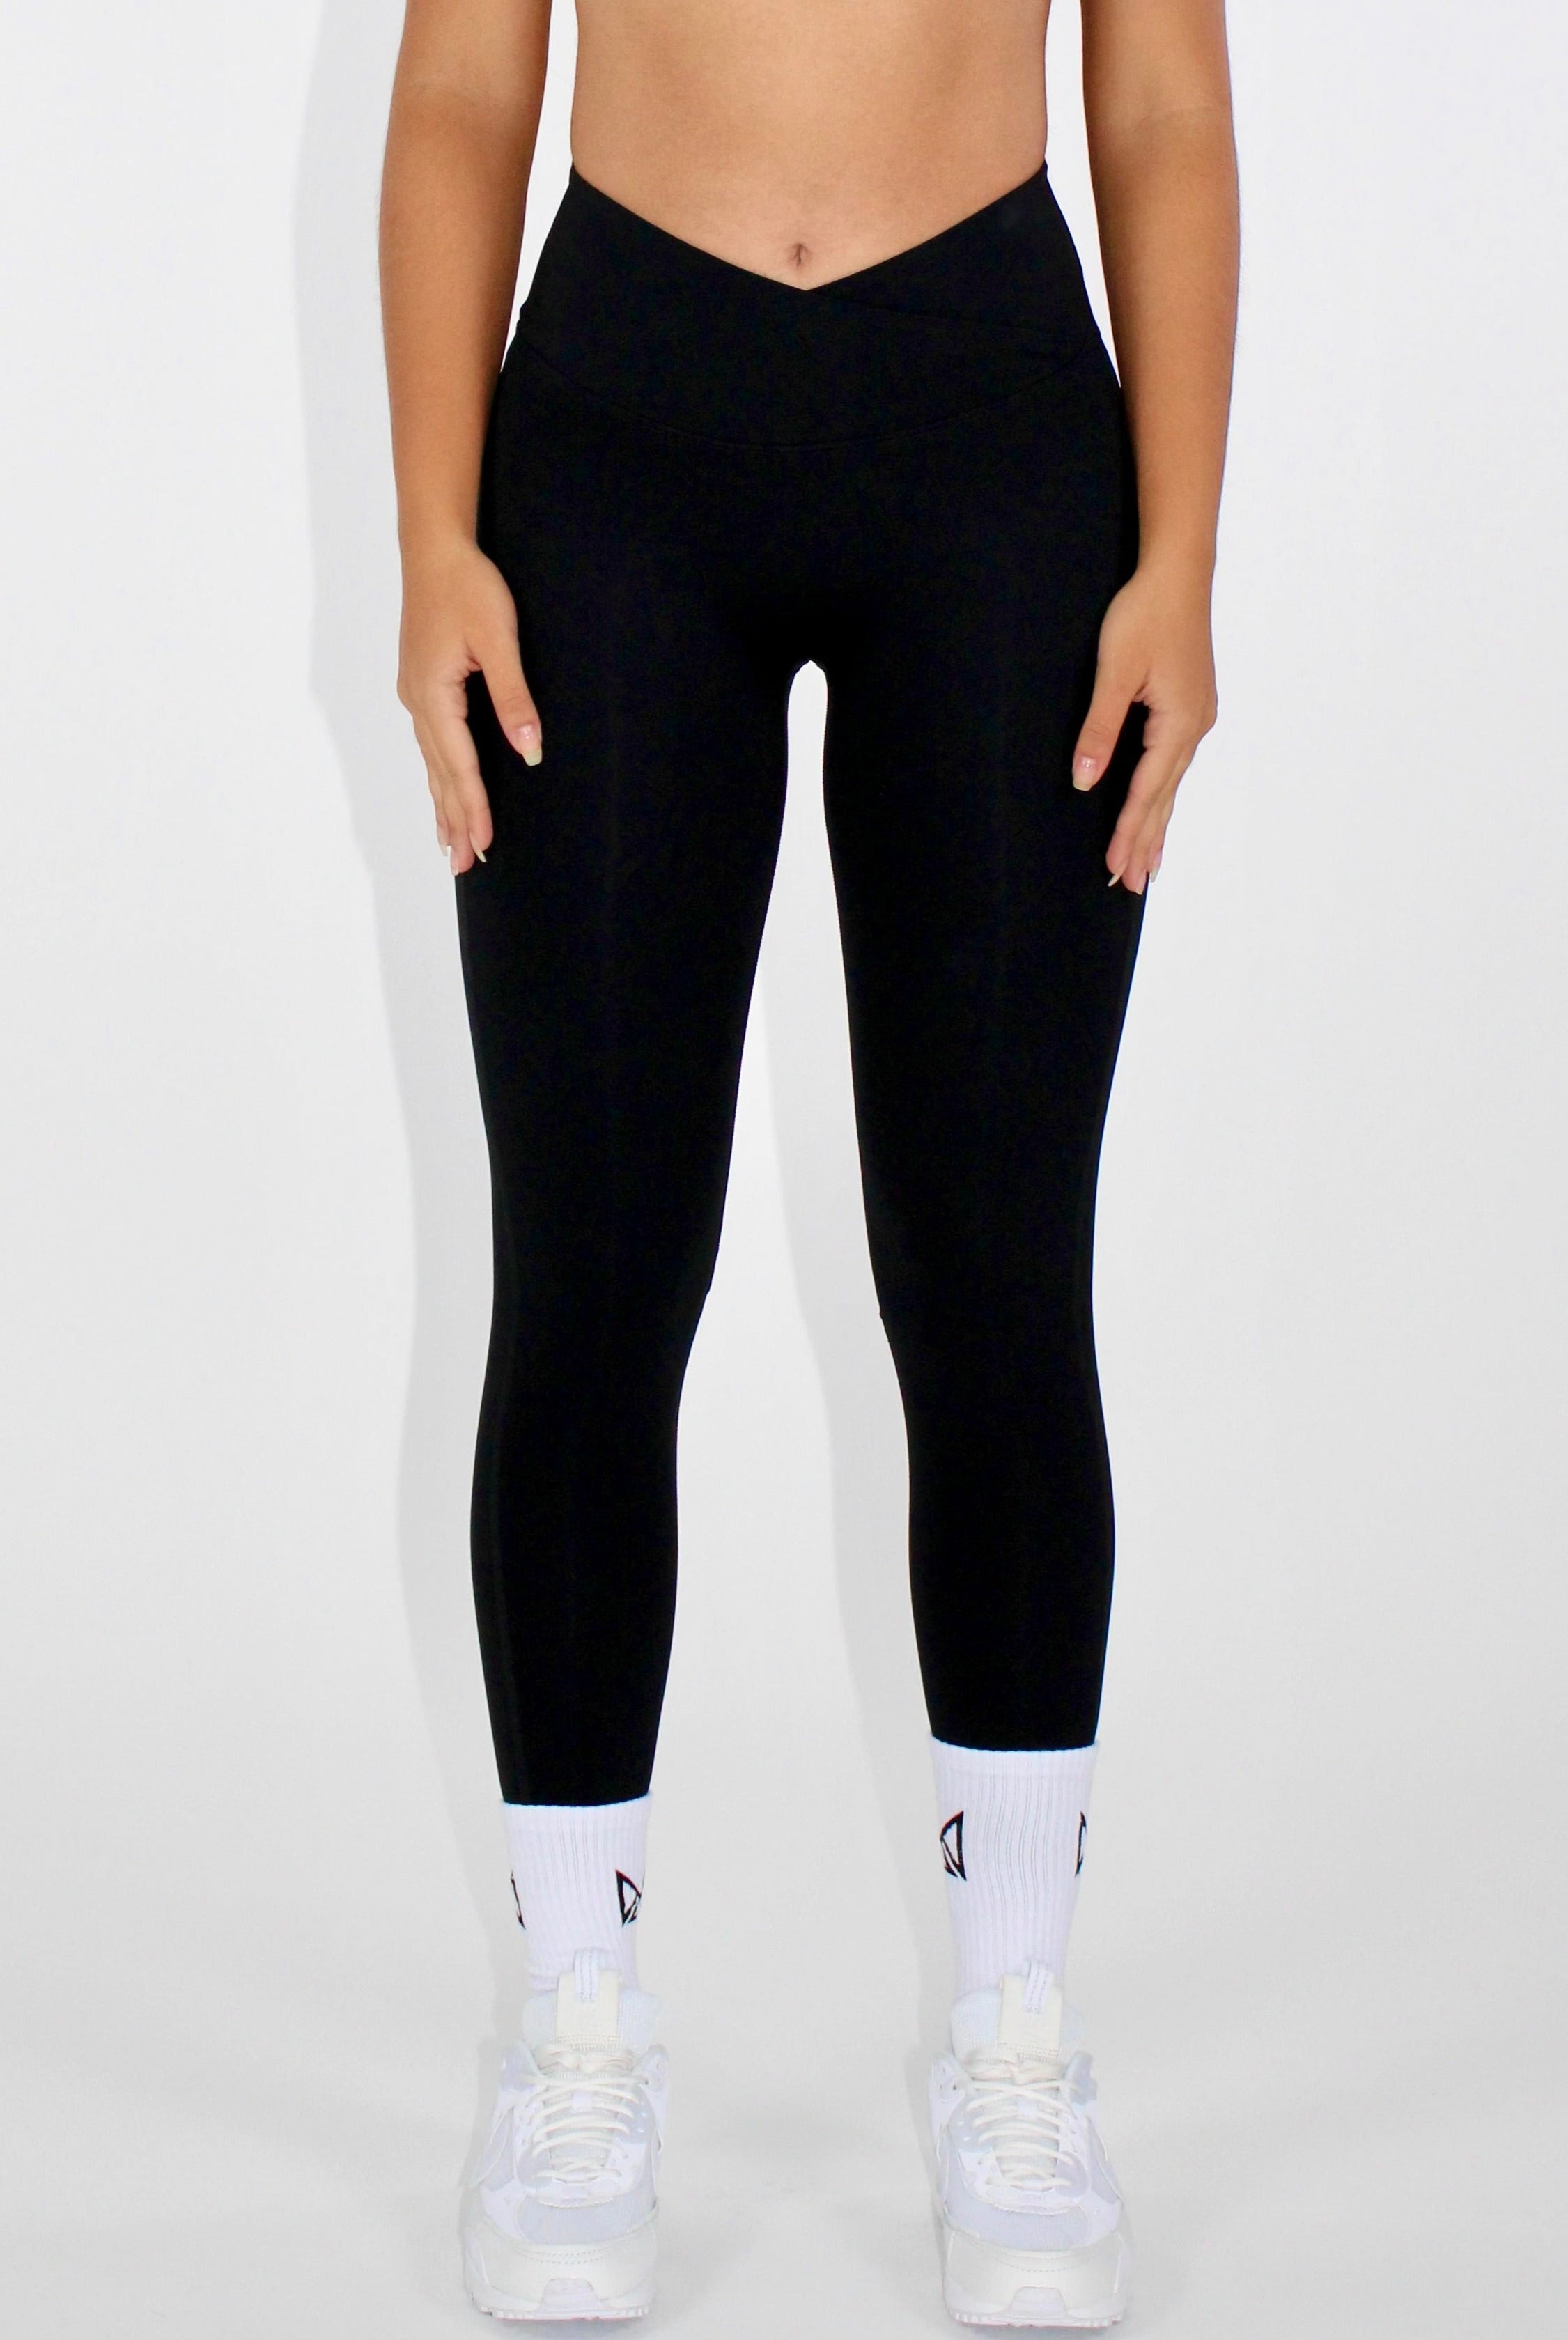 MILA MVMT Sportswear Crossover Buttery Soft Leggings with Scrunch Butt Gym Sets Black Front